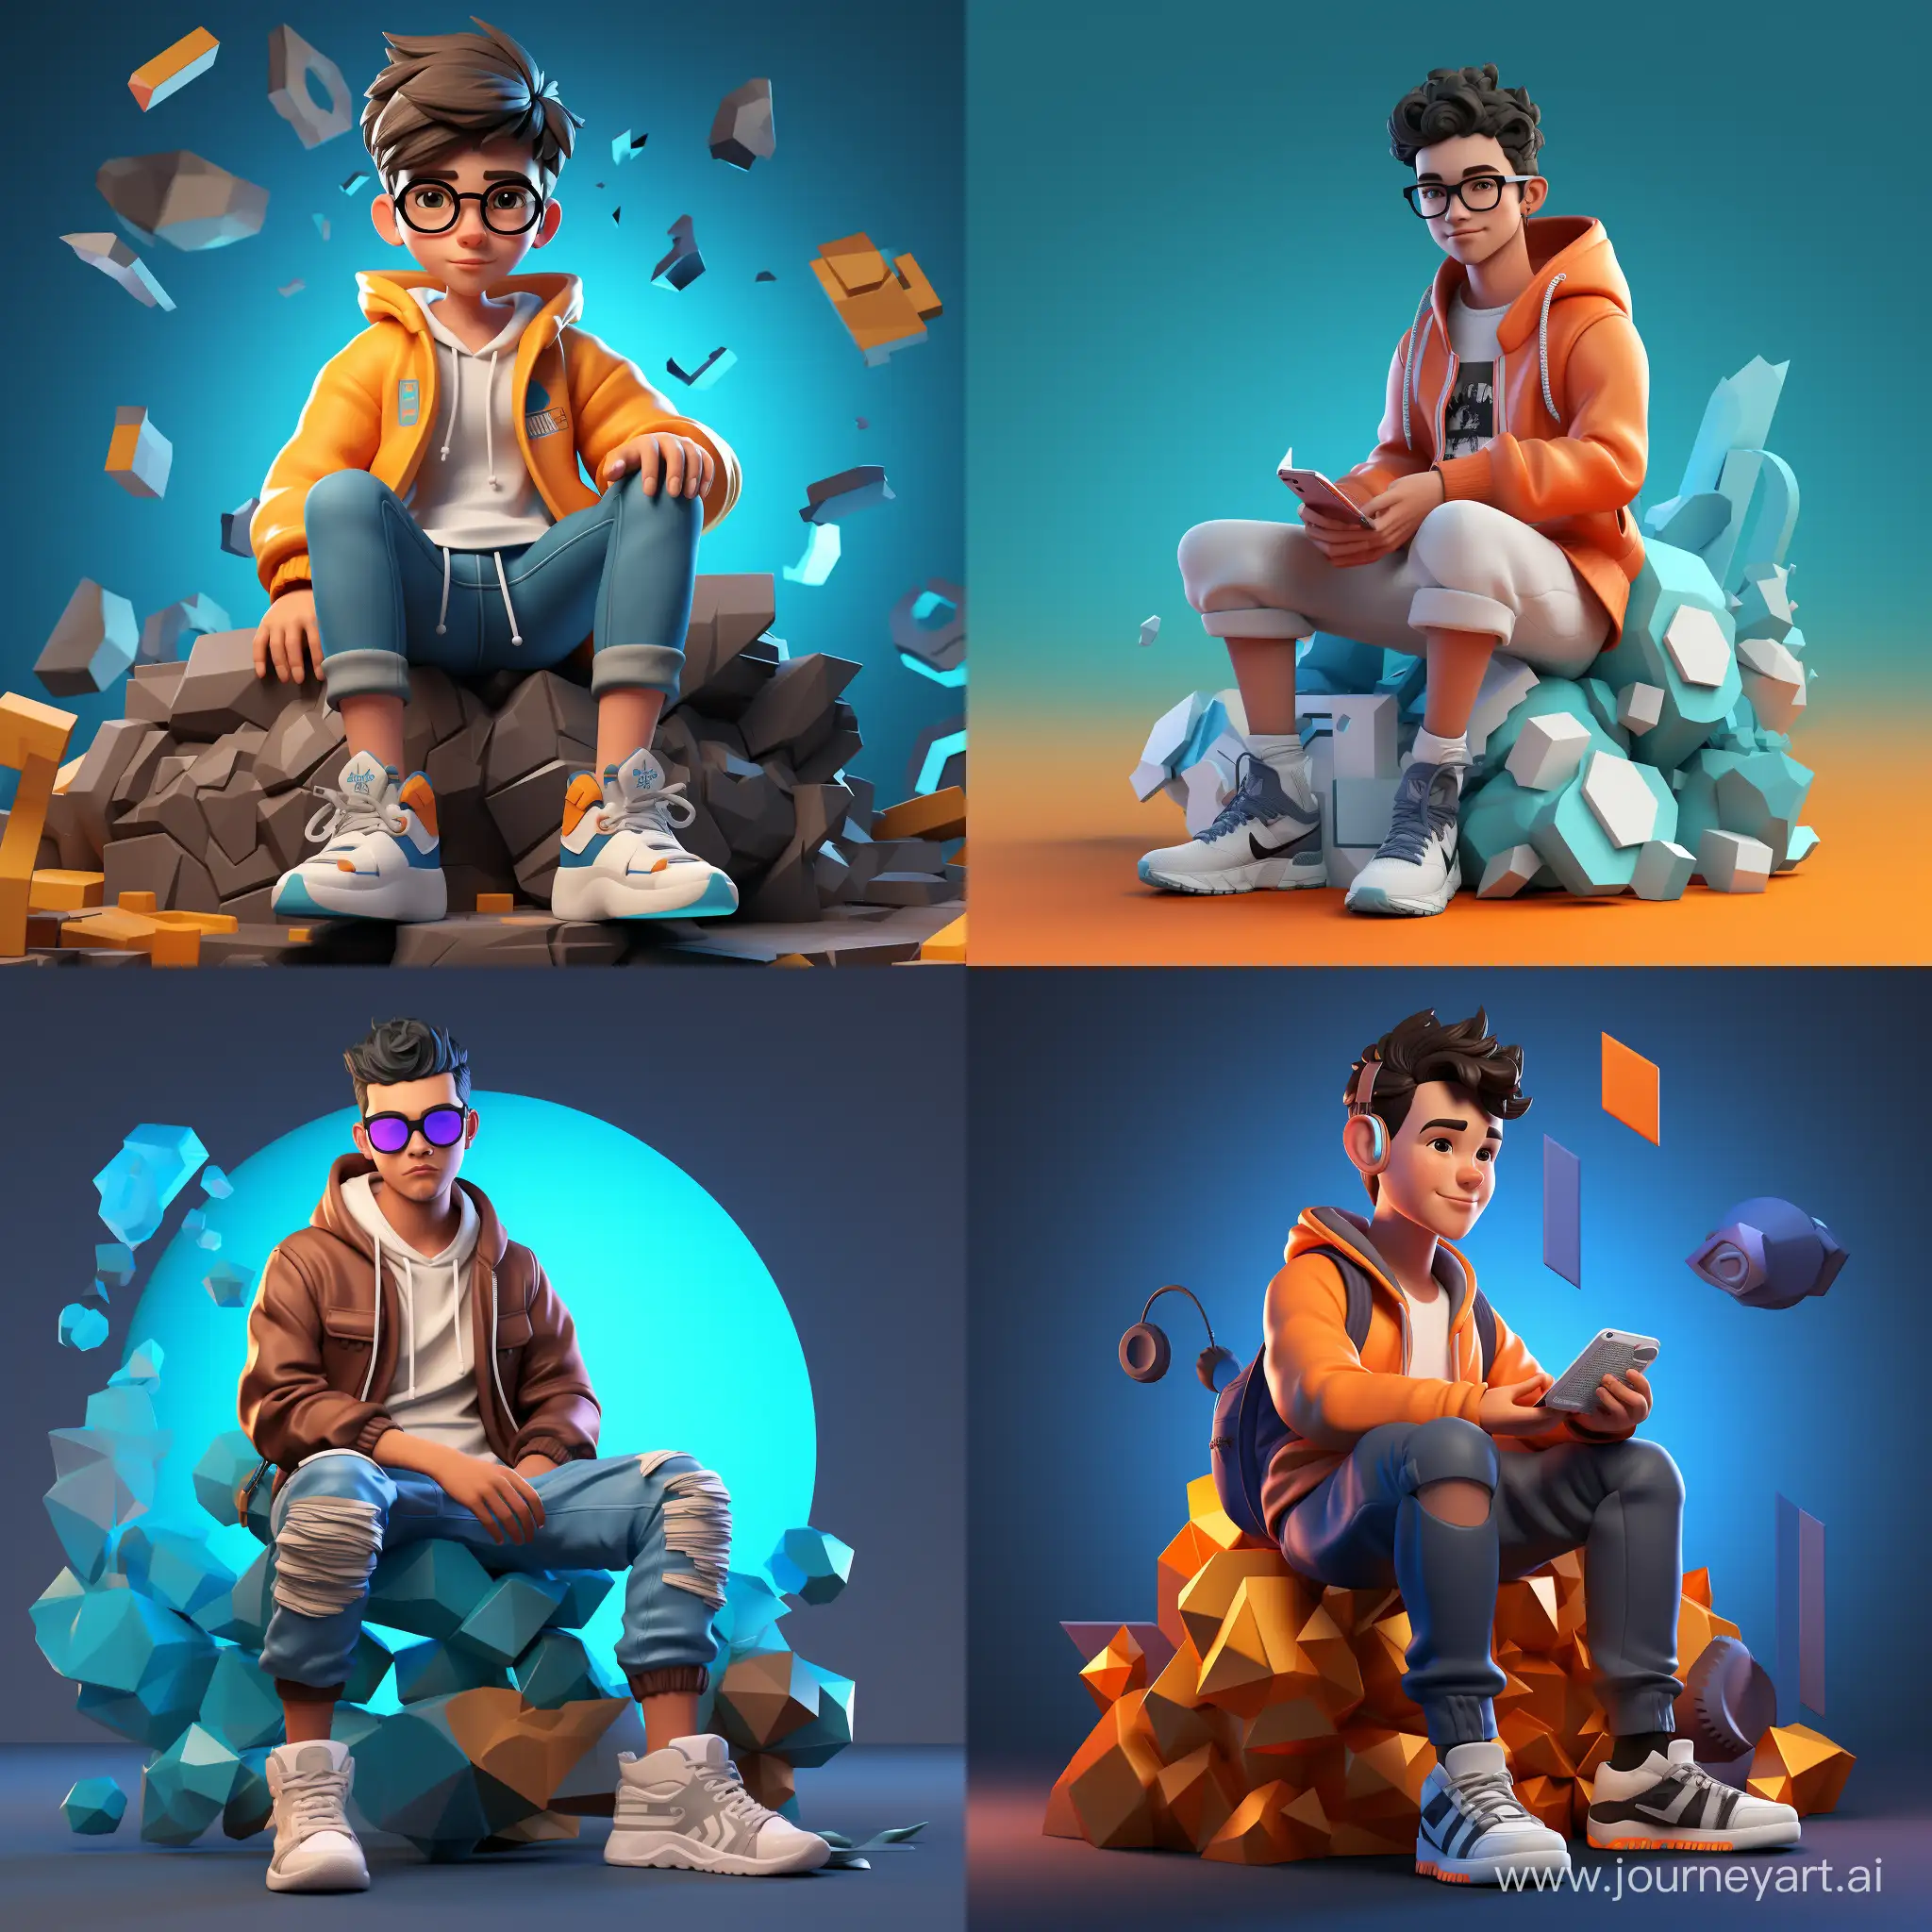 Create a 3D illustration of an animated character sitting casually on top of a social media logo "whats up". The character must wear casual modern clothing such as jeans jacket and sneakers shoes. The background of the image is a social media profile page with a user name "sai teja" and a profile picture that match.